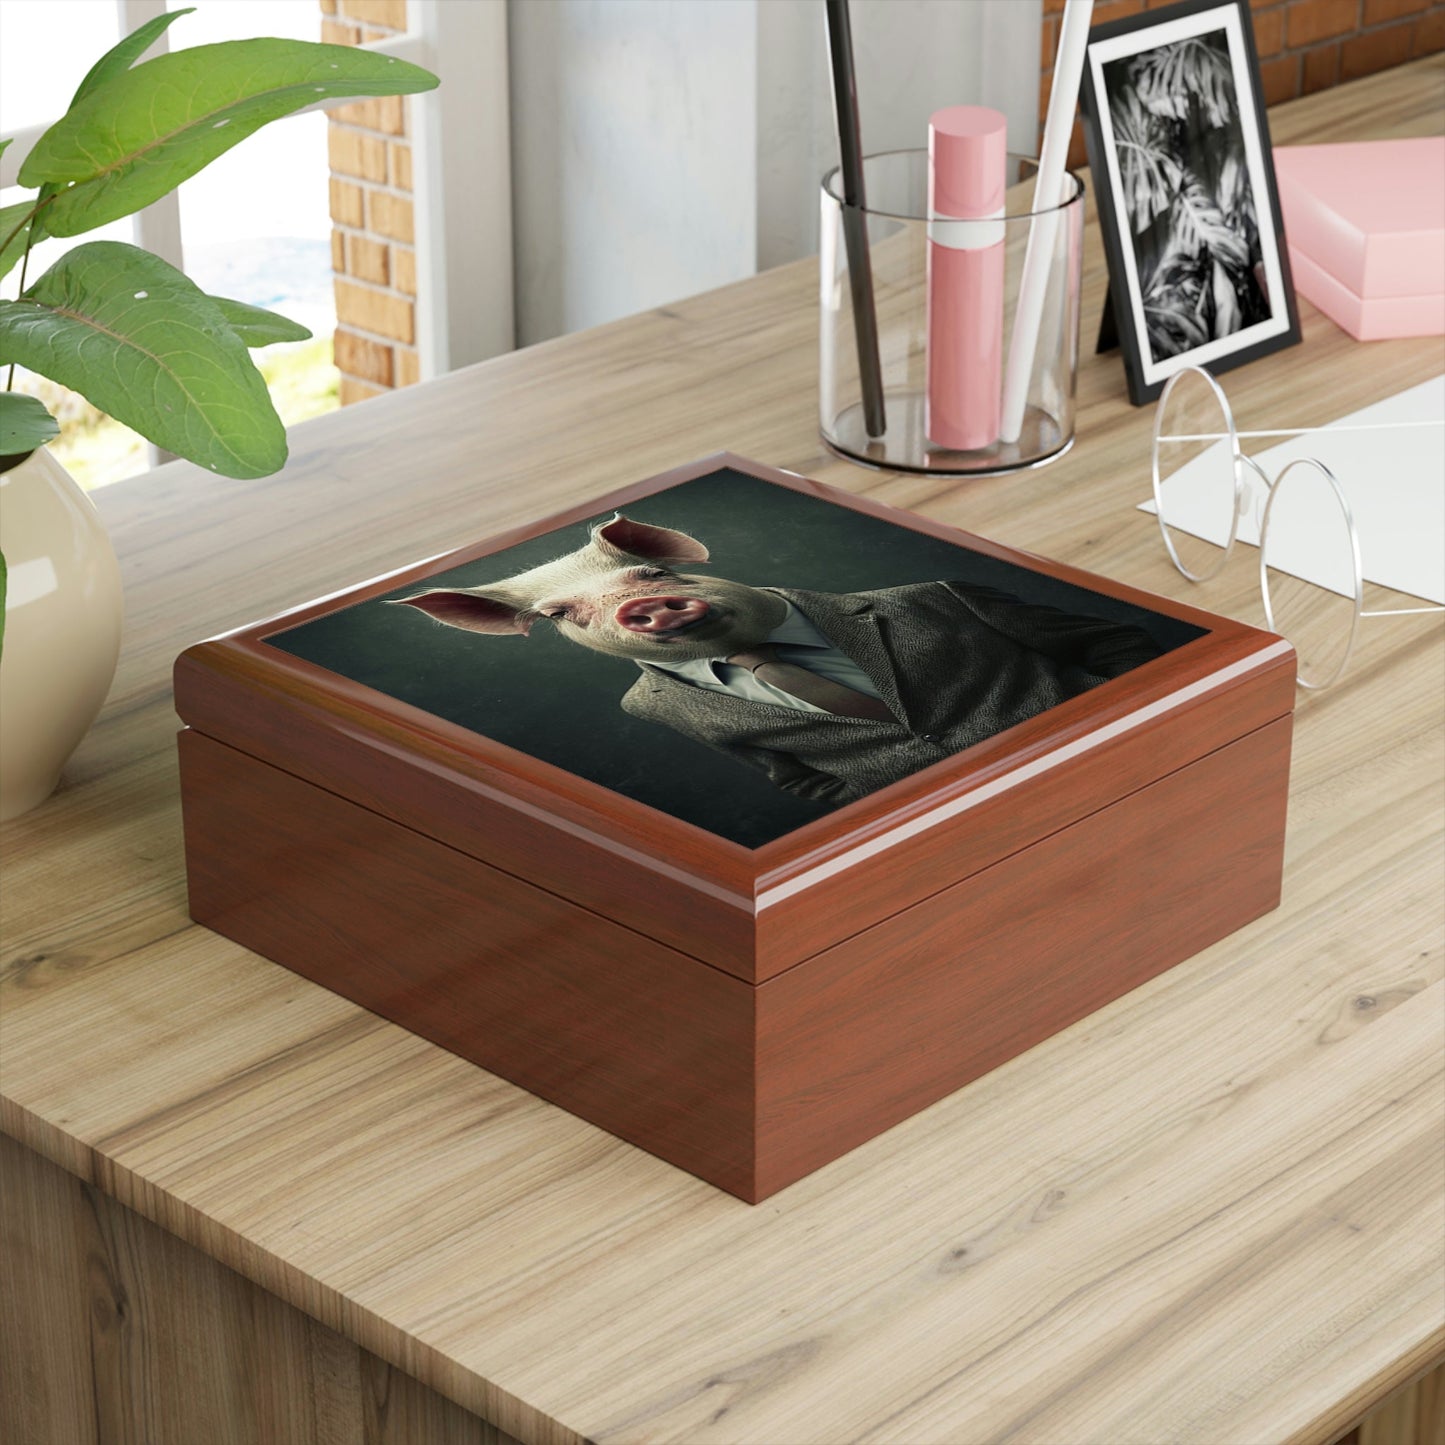 Mr. Pig Wooden Keepsake Jewelry Box with Ceramic Tile Cover